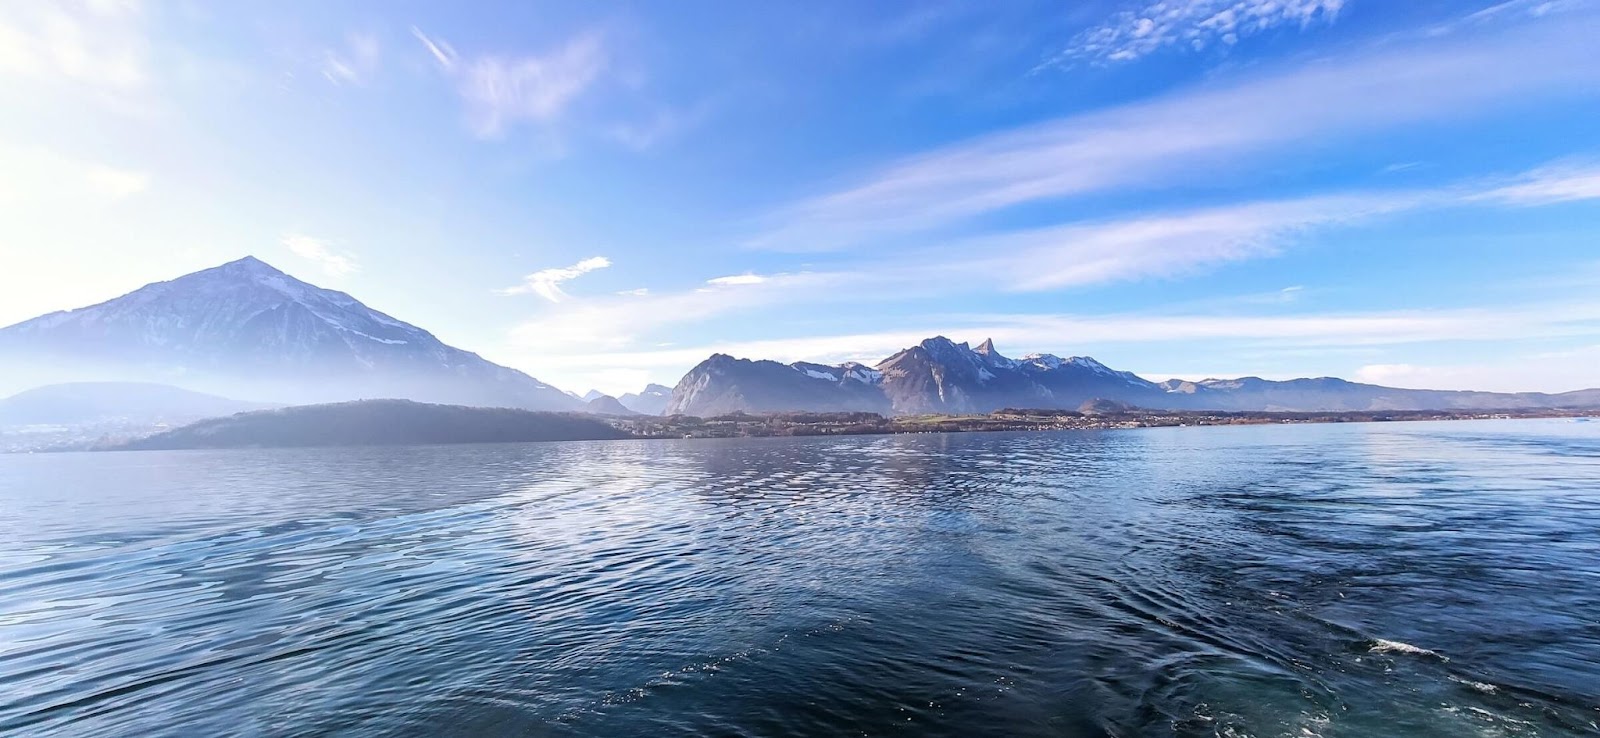 1 day in Interlaken, Lake Thun, panoramic view of Lake Thun, clear blue skies with snow capped mountains in the background